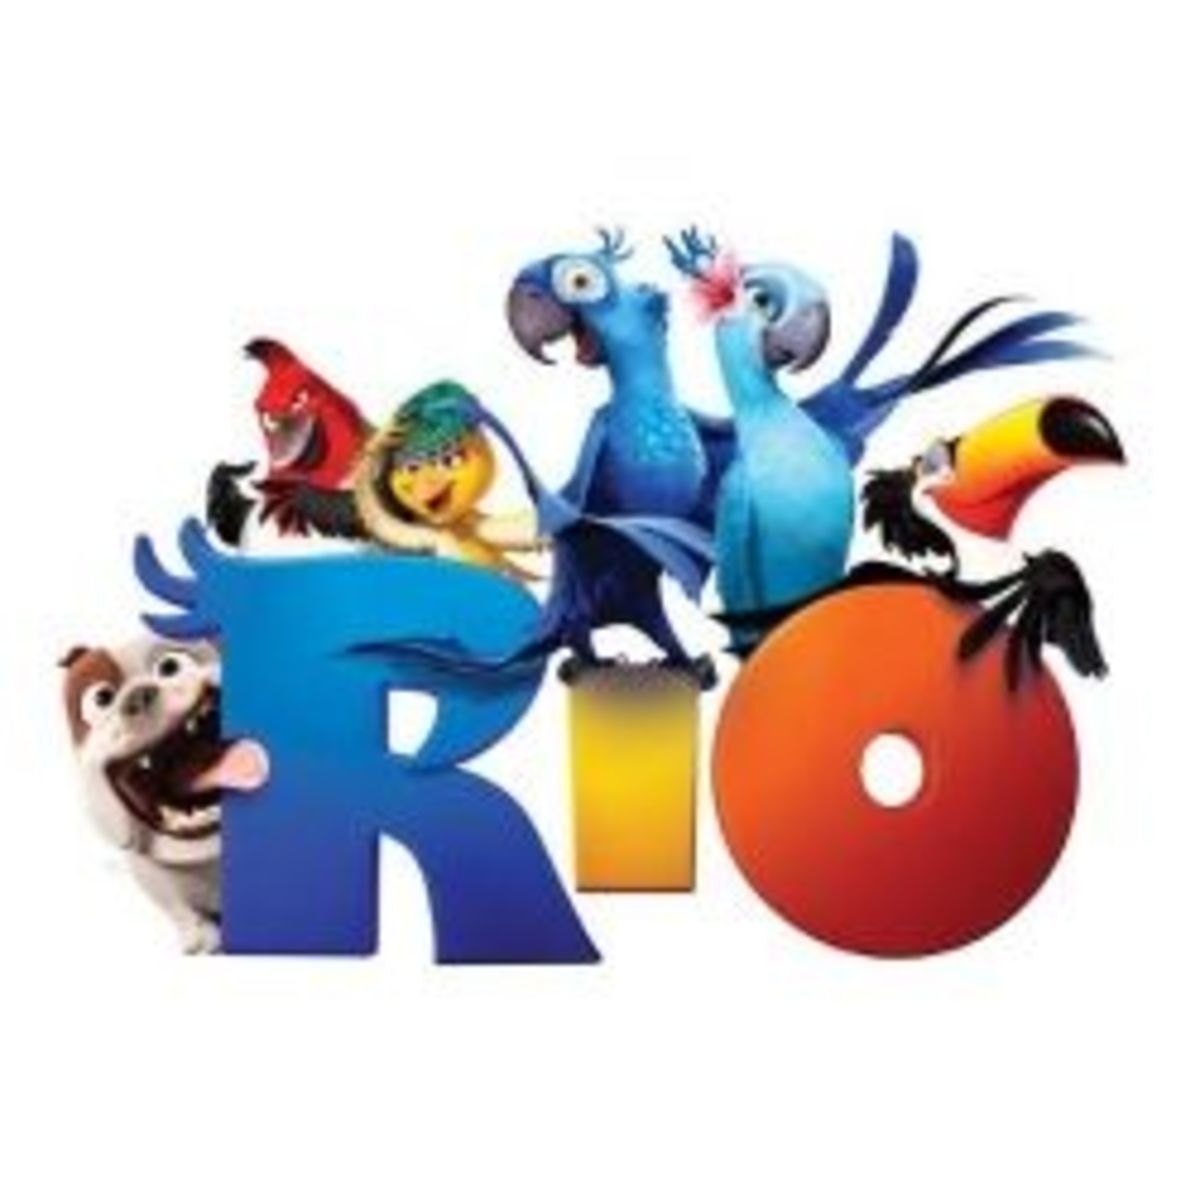 Rio Movie: Story of Two Macaws